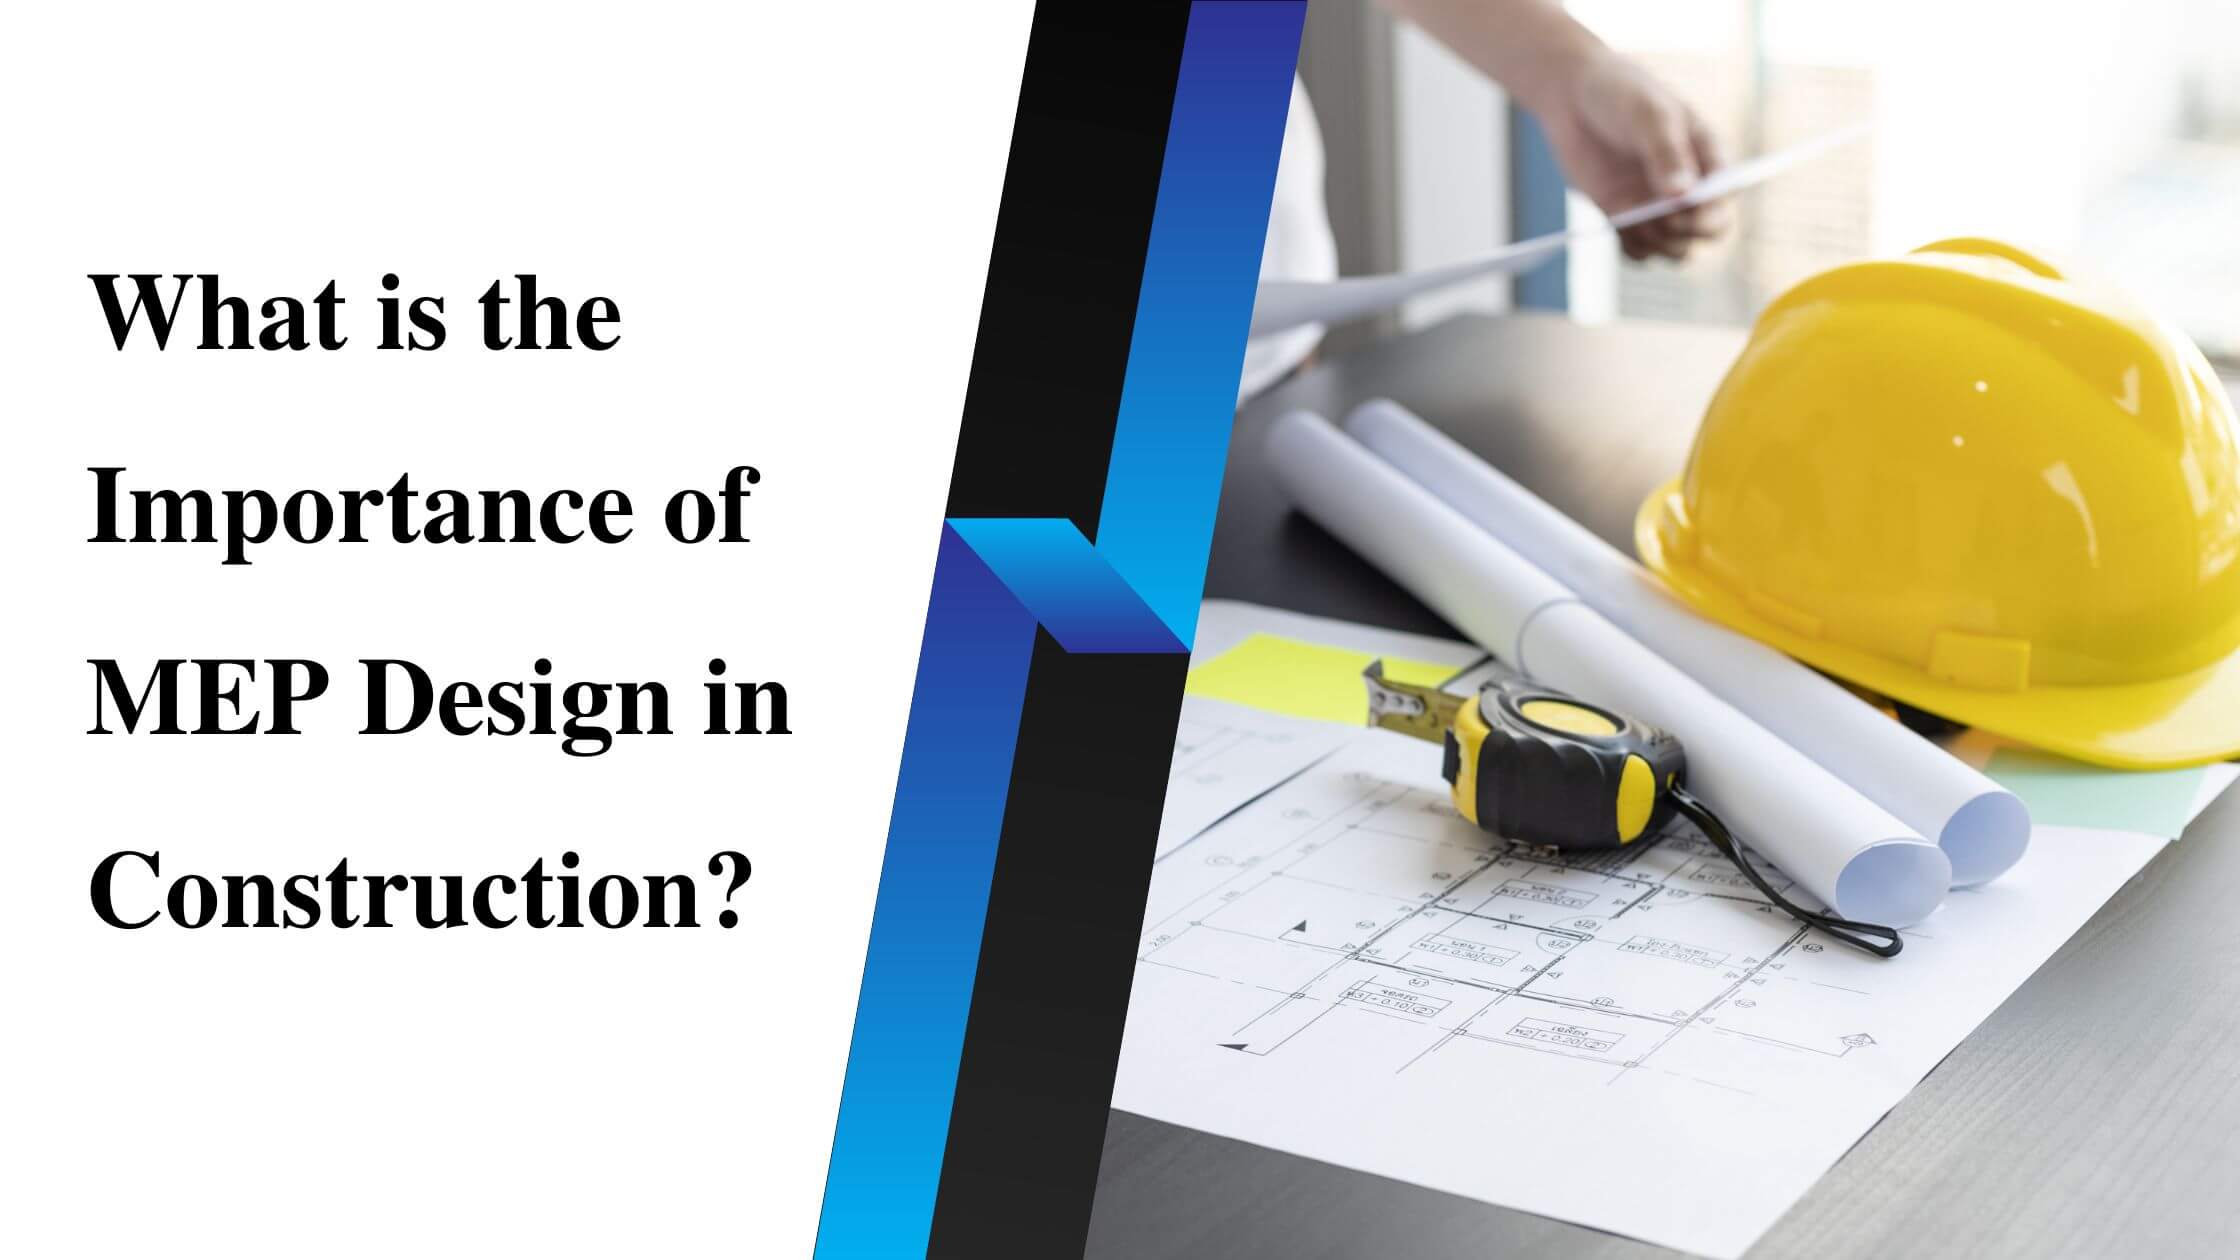 What is the Importance of MEP Design in Construction?